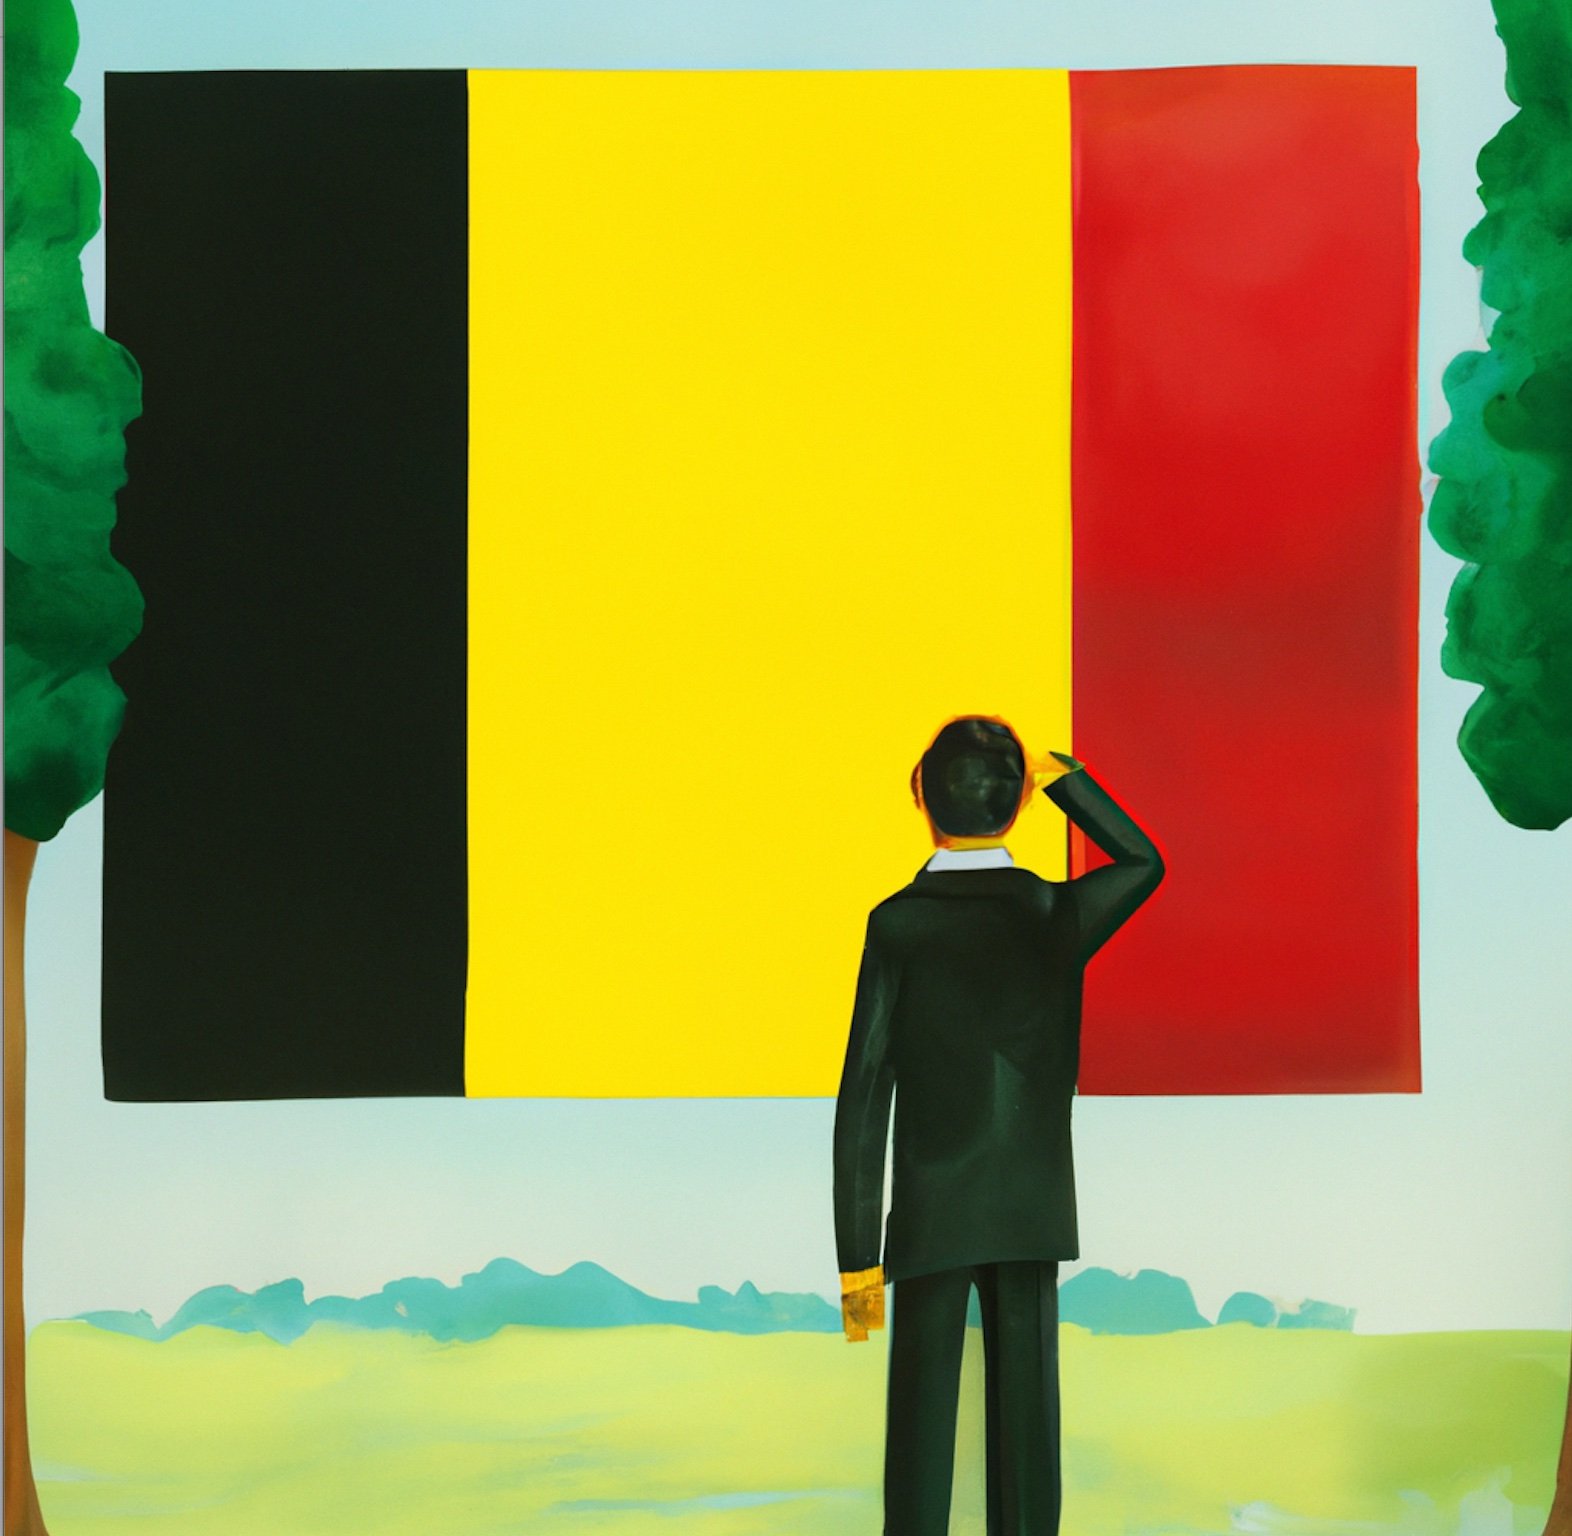 Person standing looking at the Belgian flag with two trees side by side